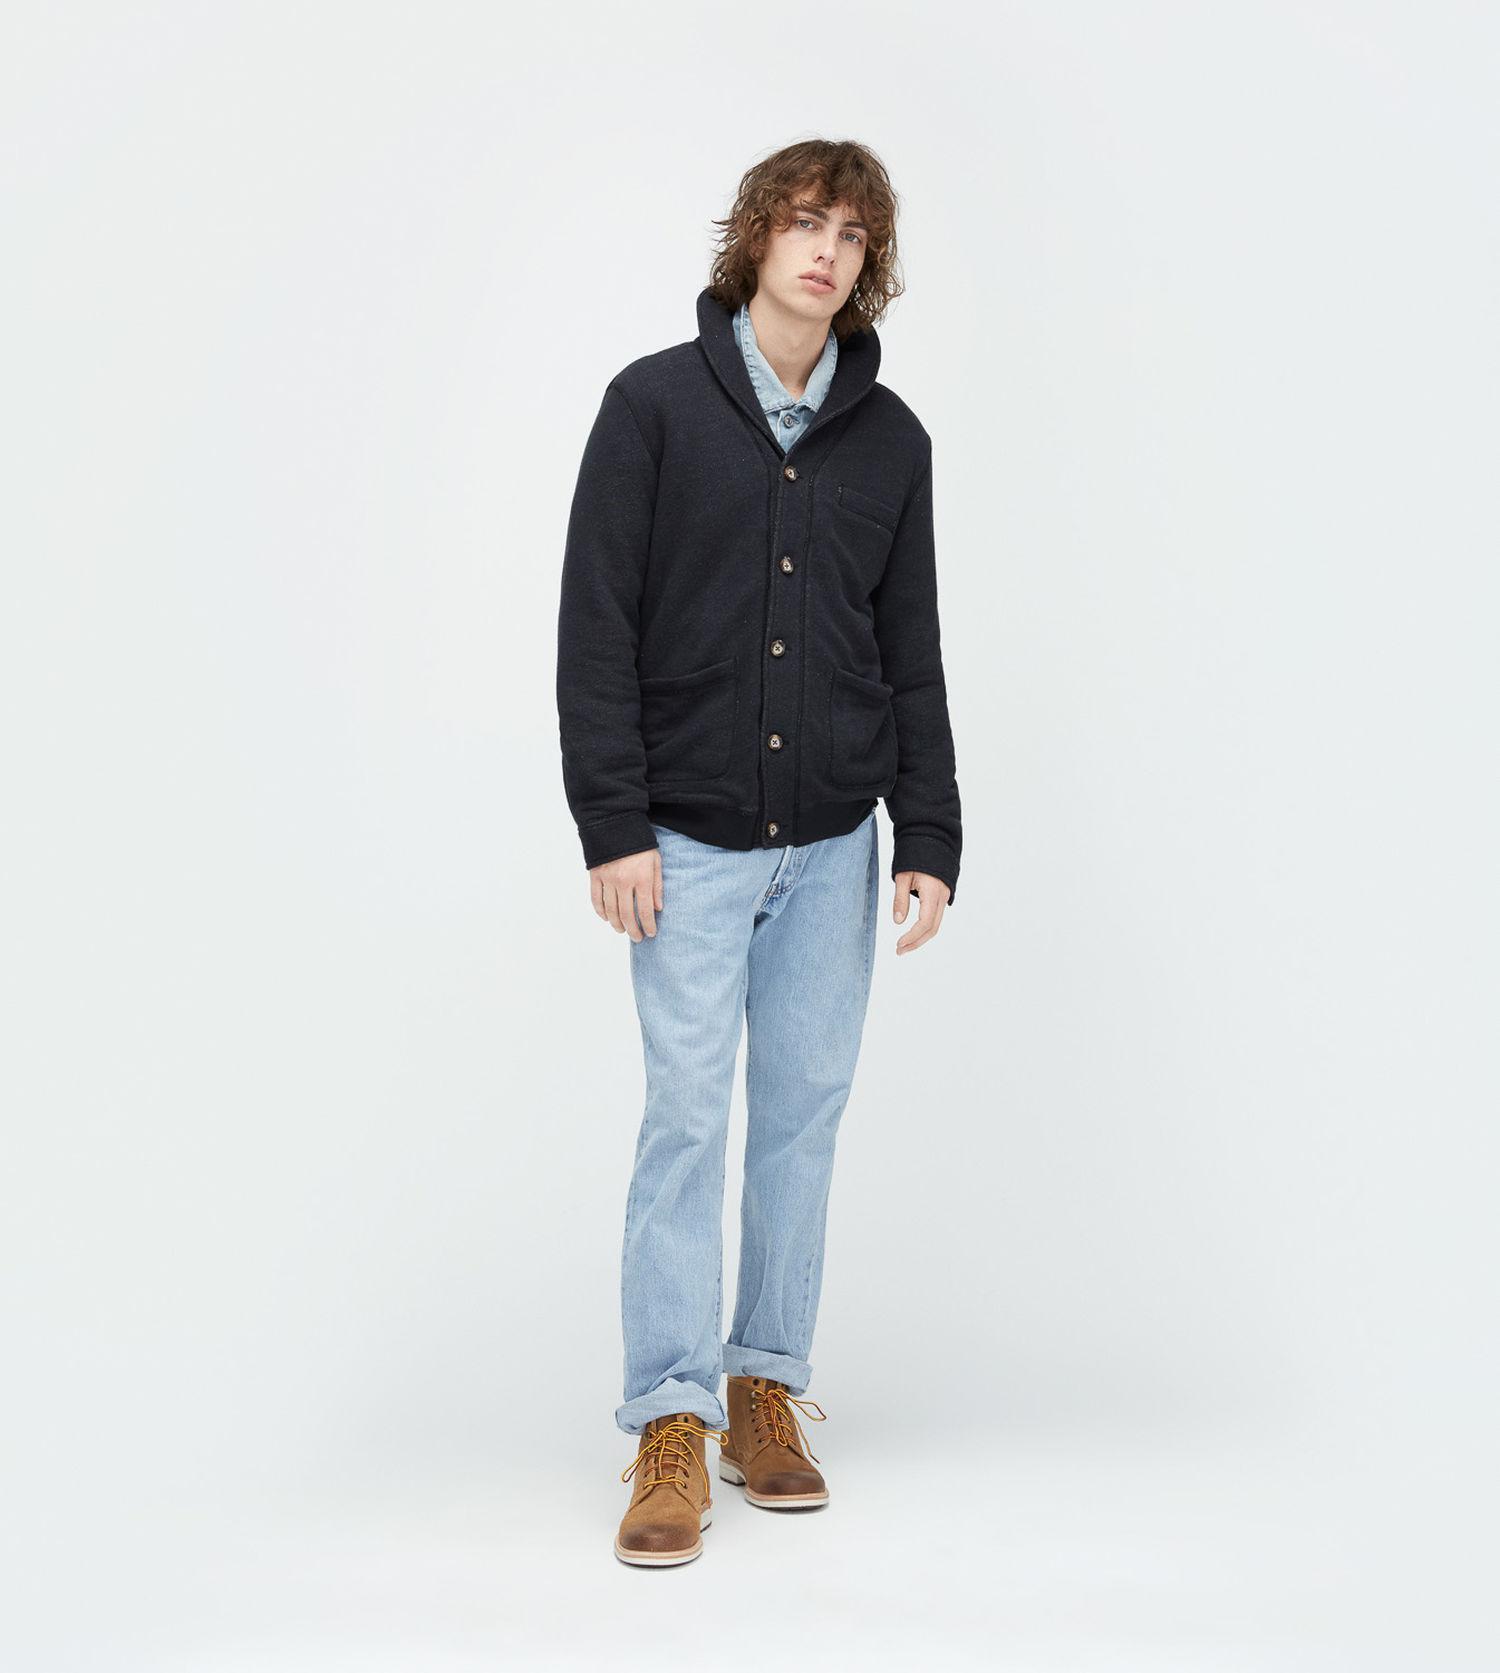 UGG Cotton Men's Sherpa Lined Shawl Cardigan in Black for